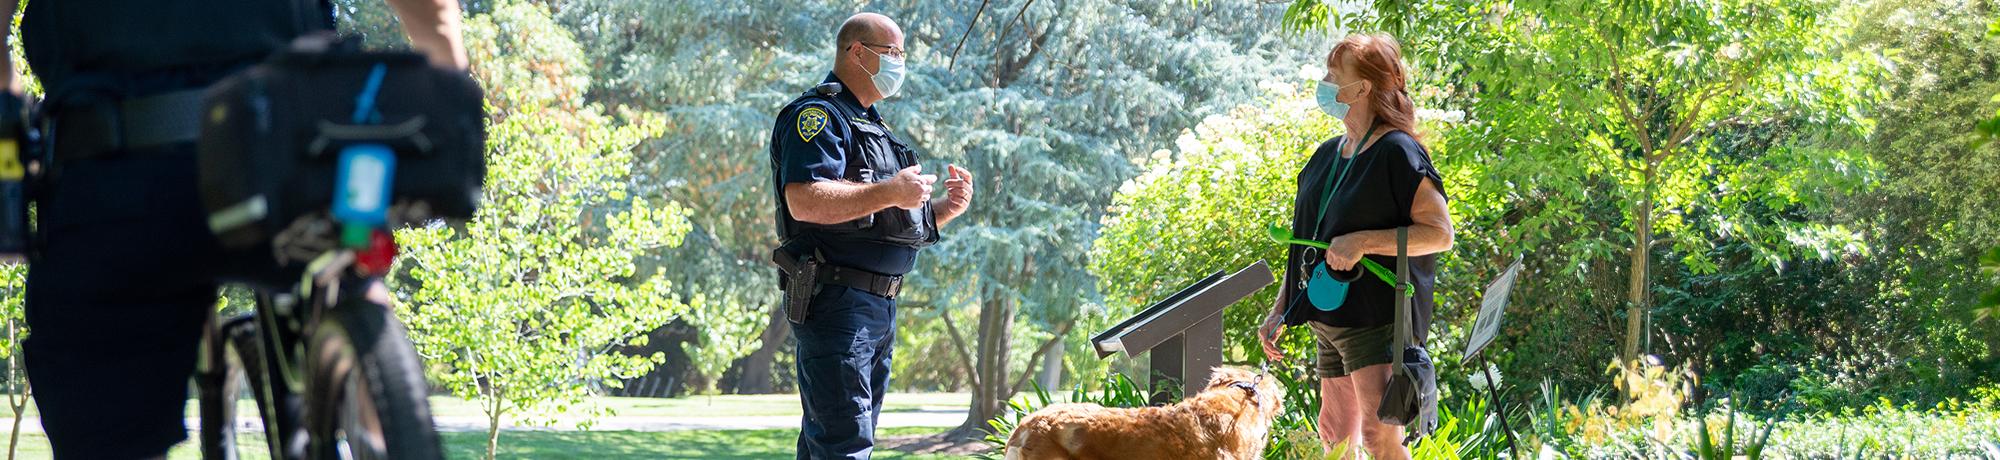 Officer and visitor with her dog talk in the arboretum while wearing face coverings